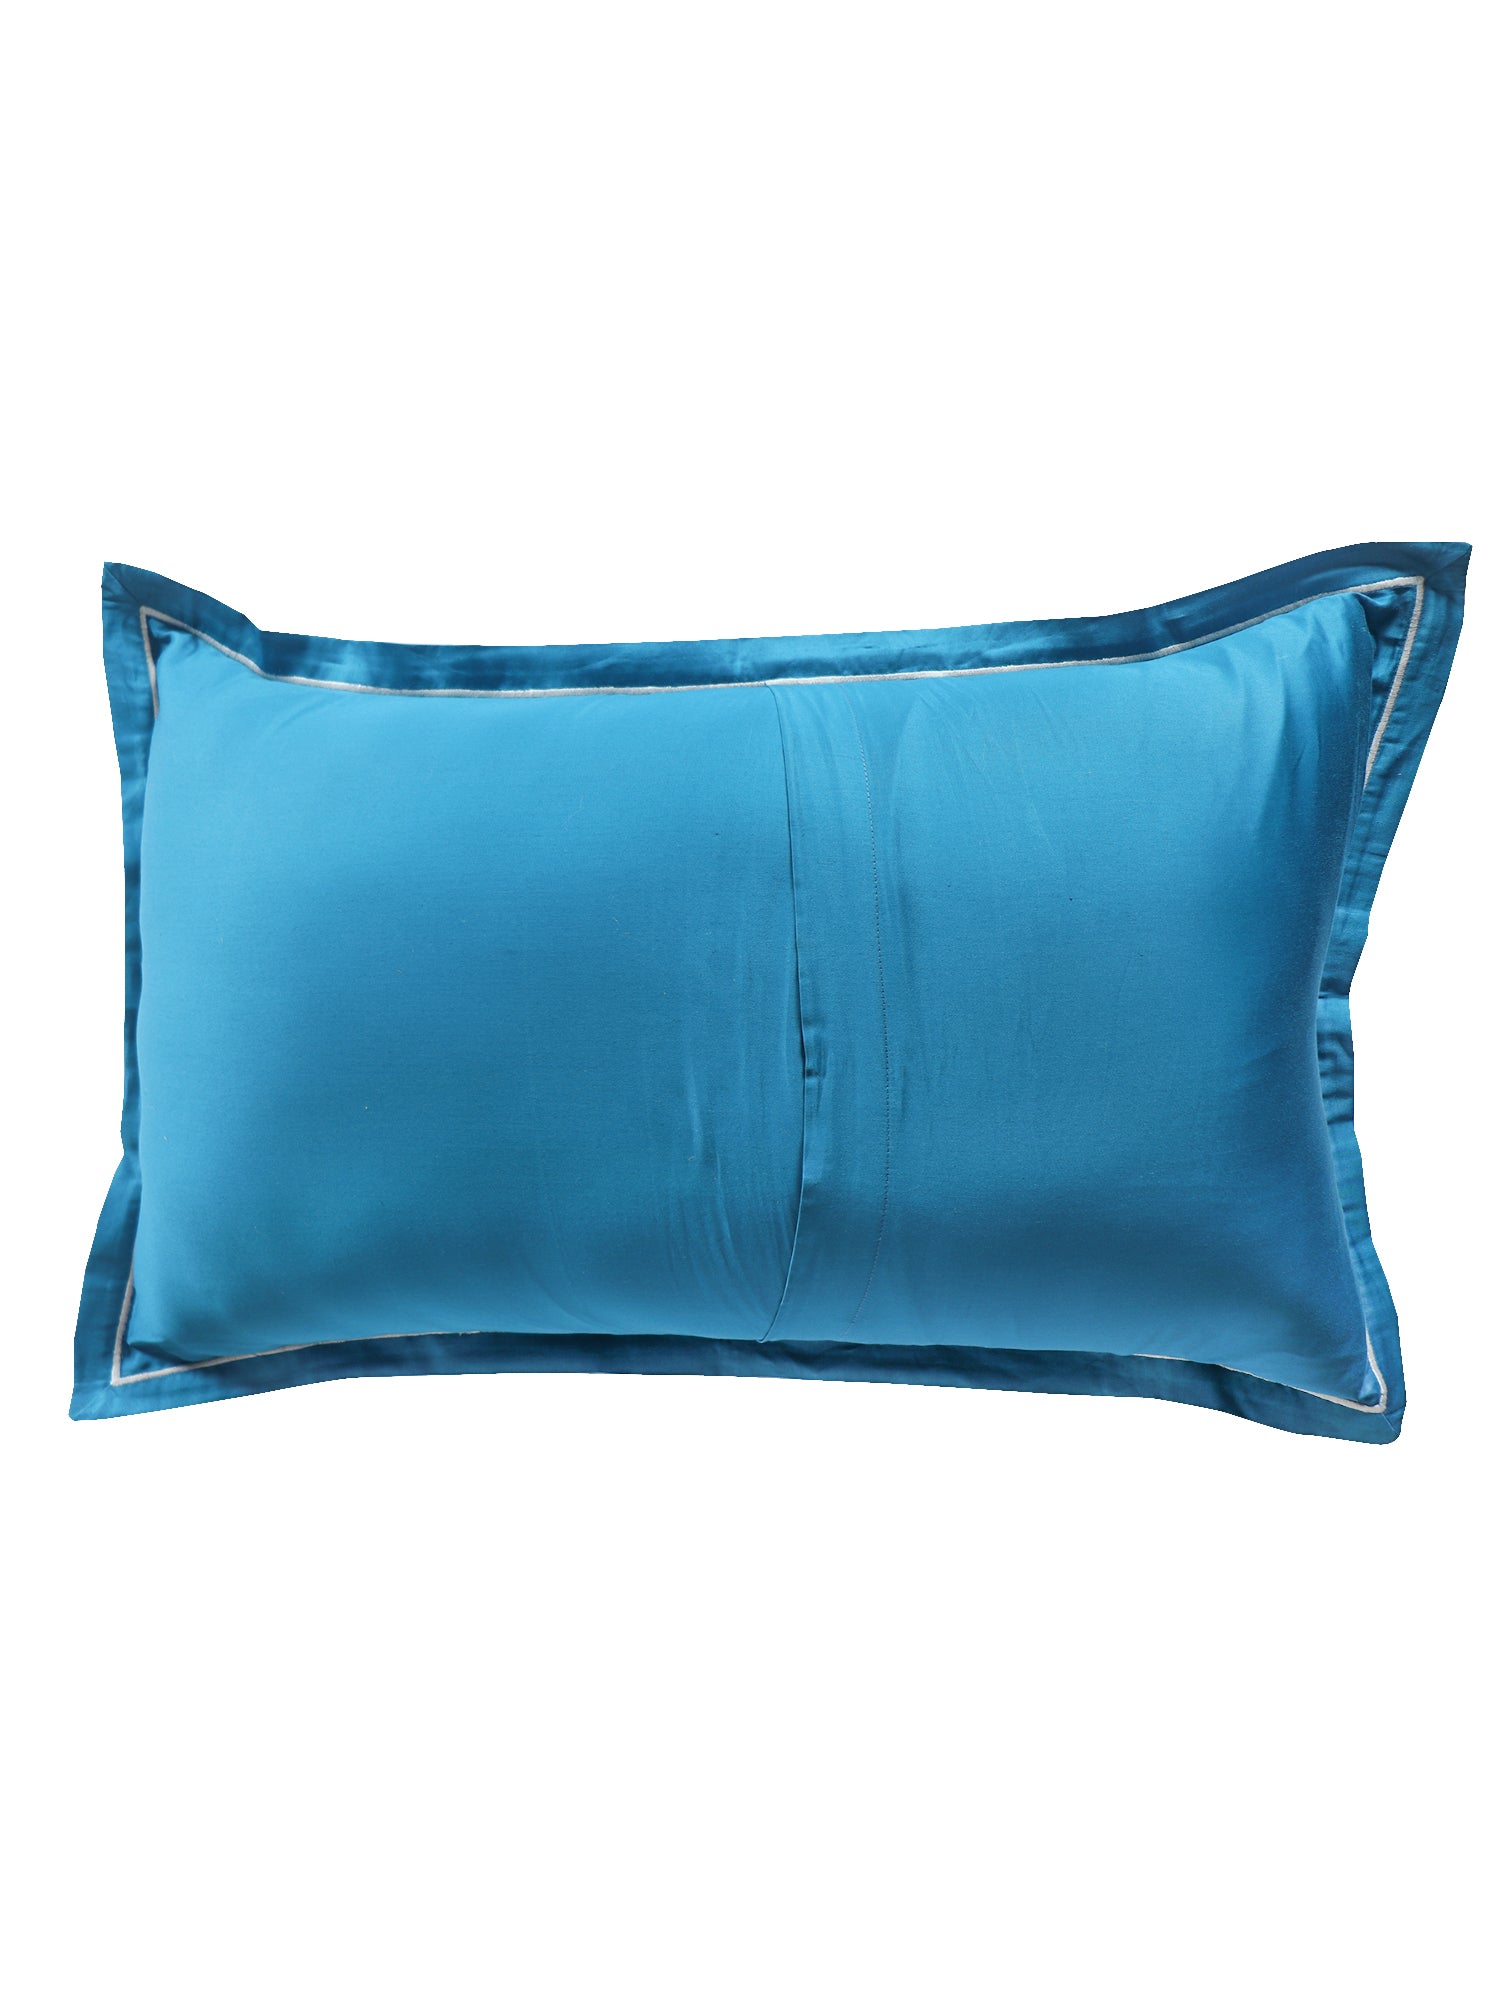 teal blue colored pillow sham cover for king size embroidered bedsheet